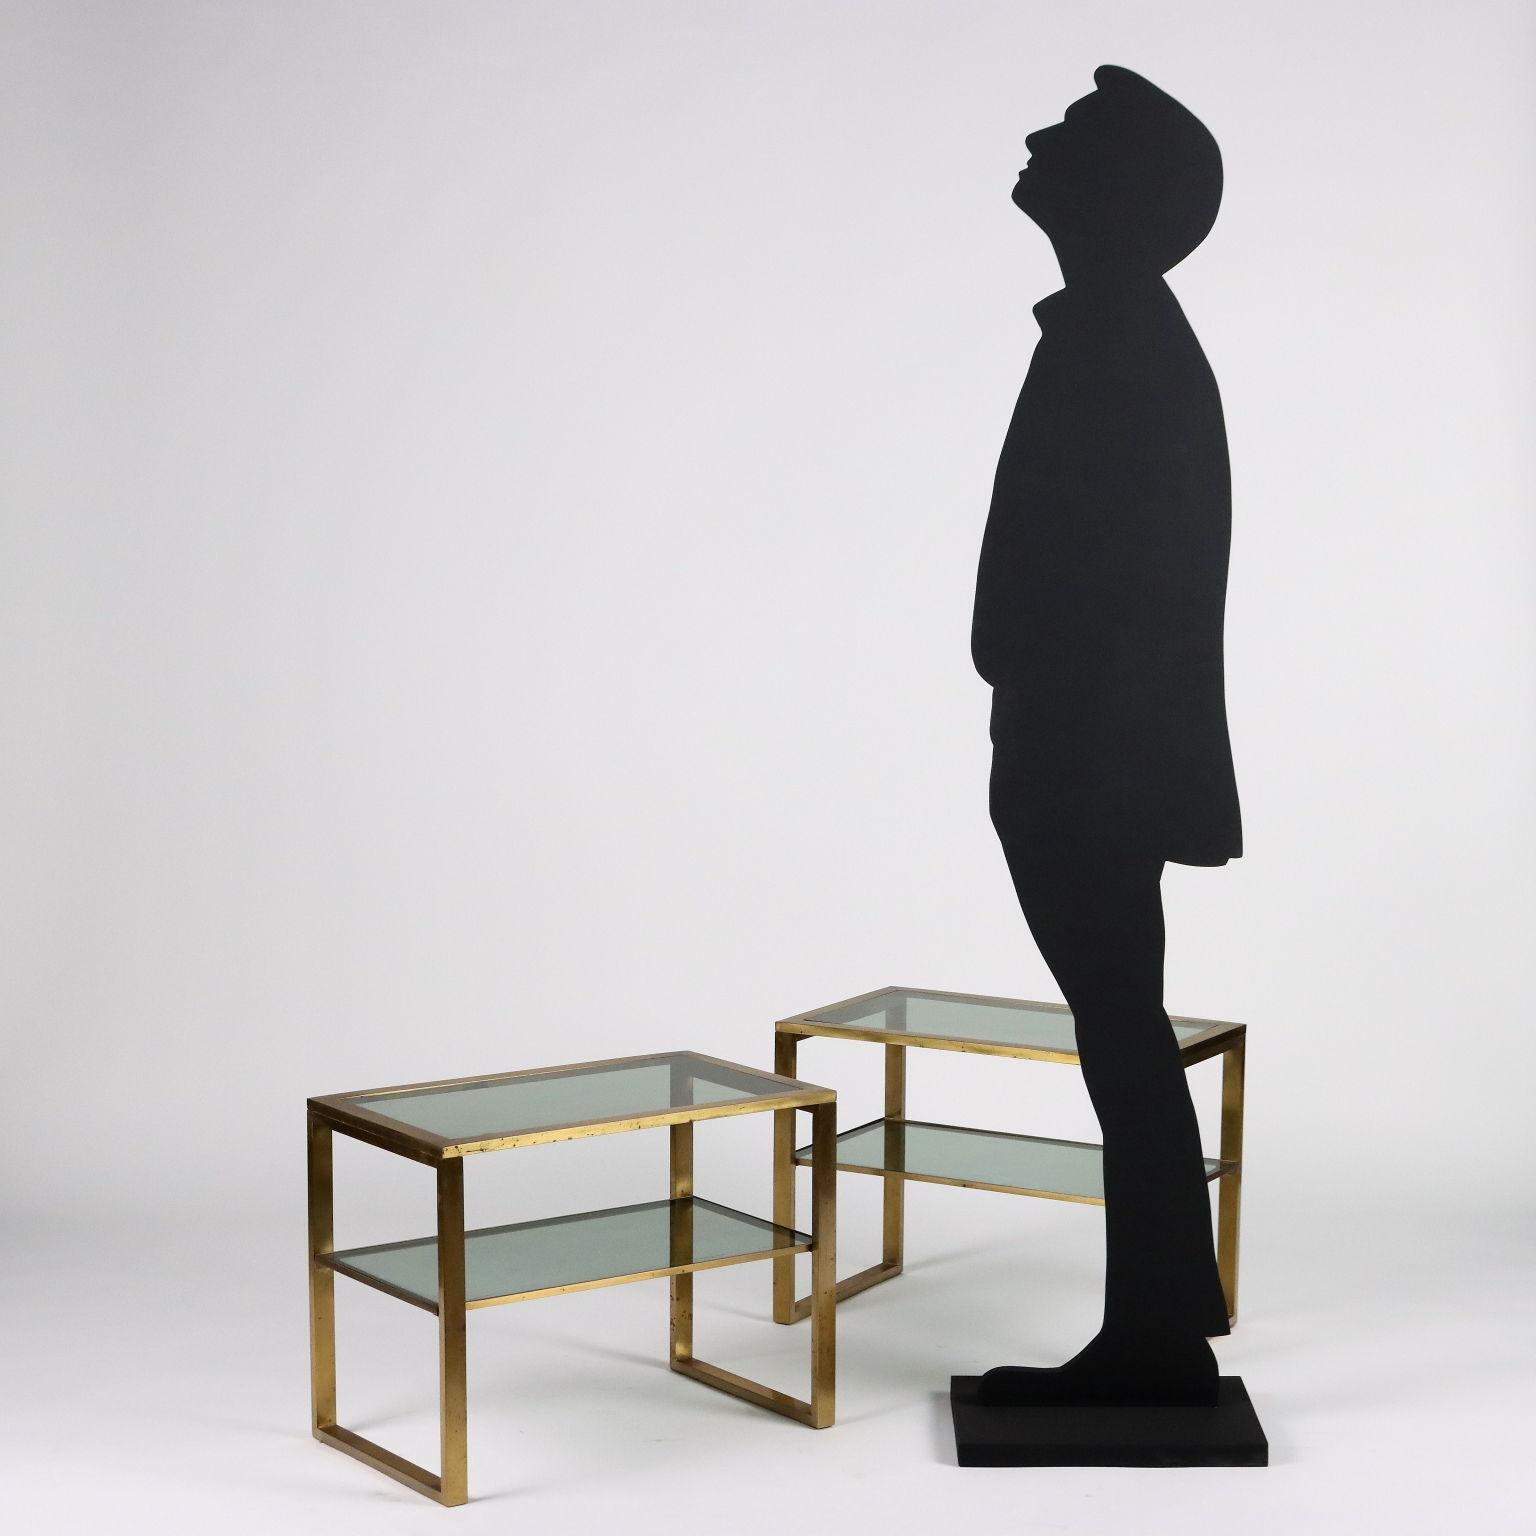 Pair of small tables; brass and glass.